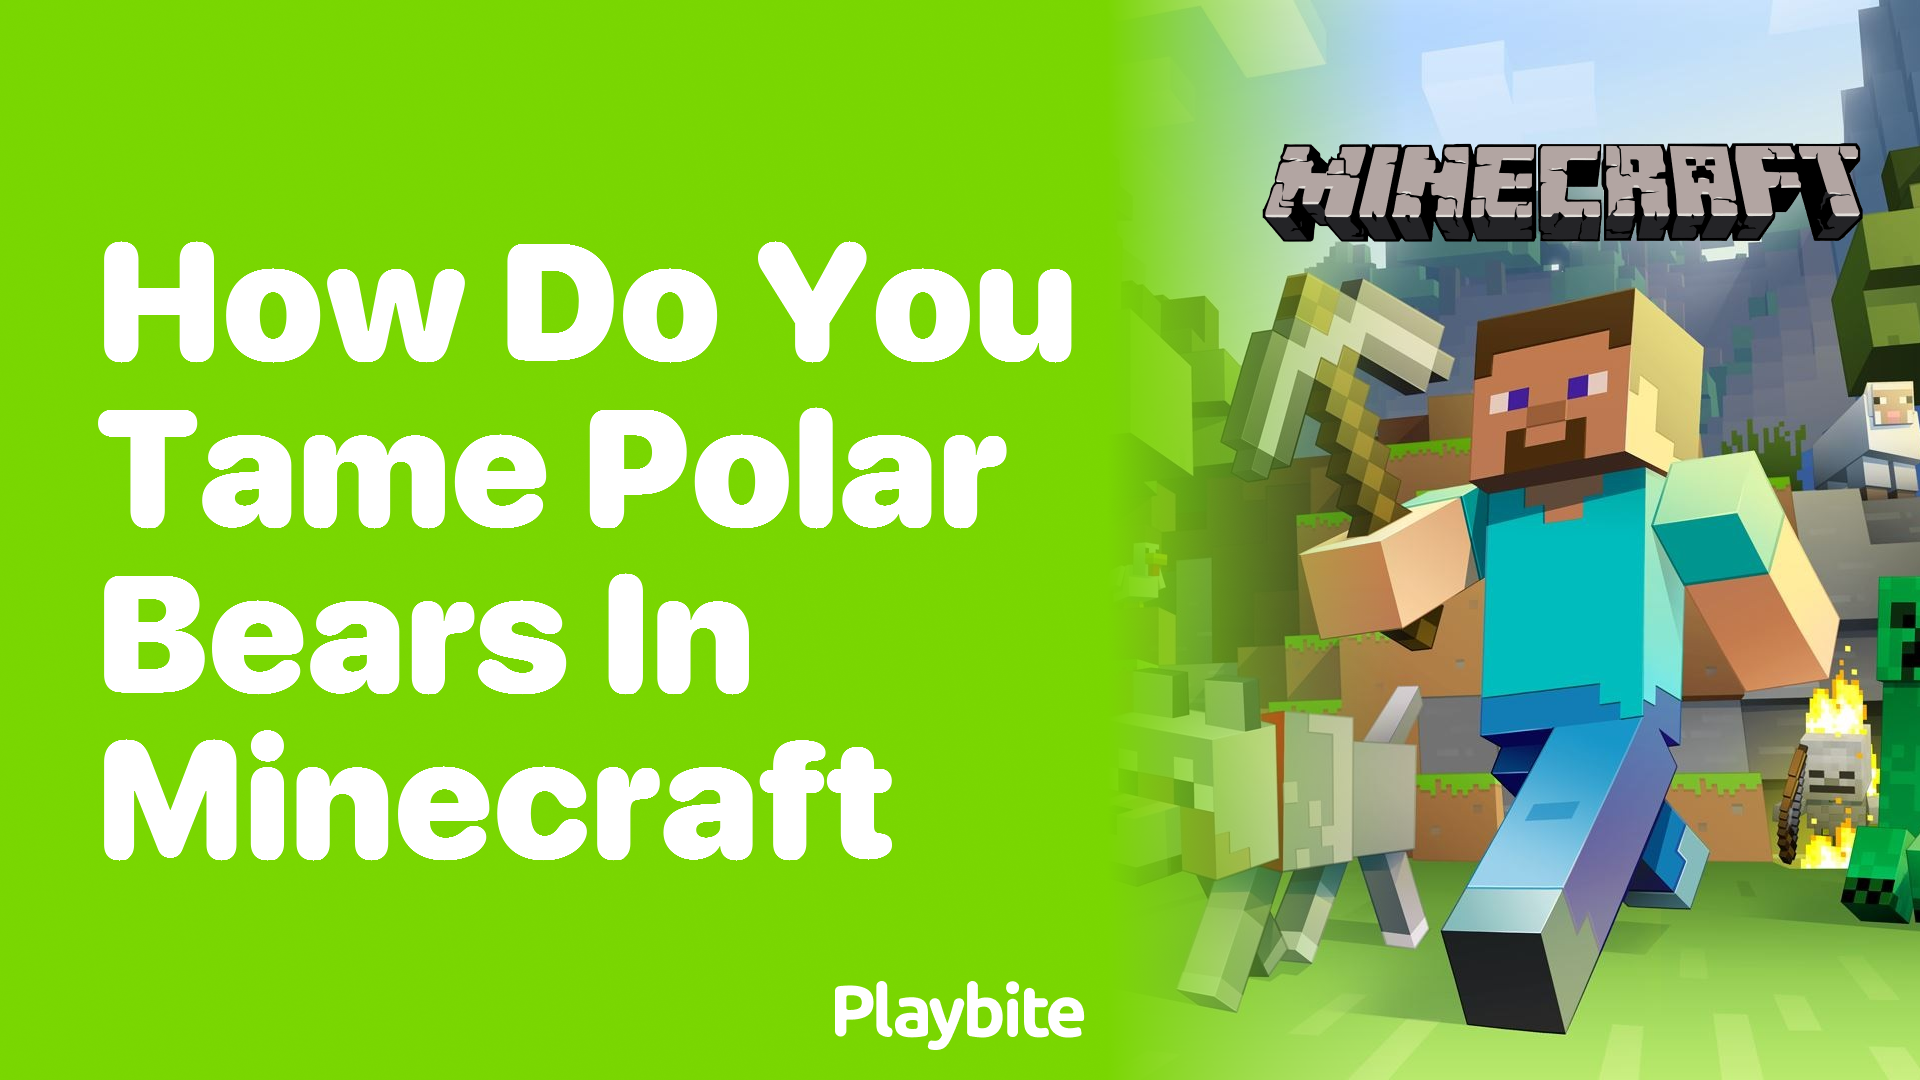 Taming Polar Bears in Minecraft: Is It Possible?